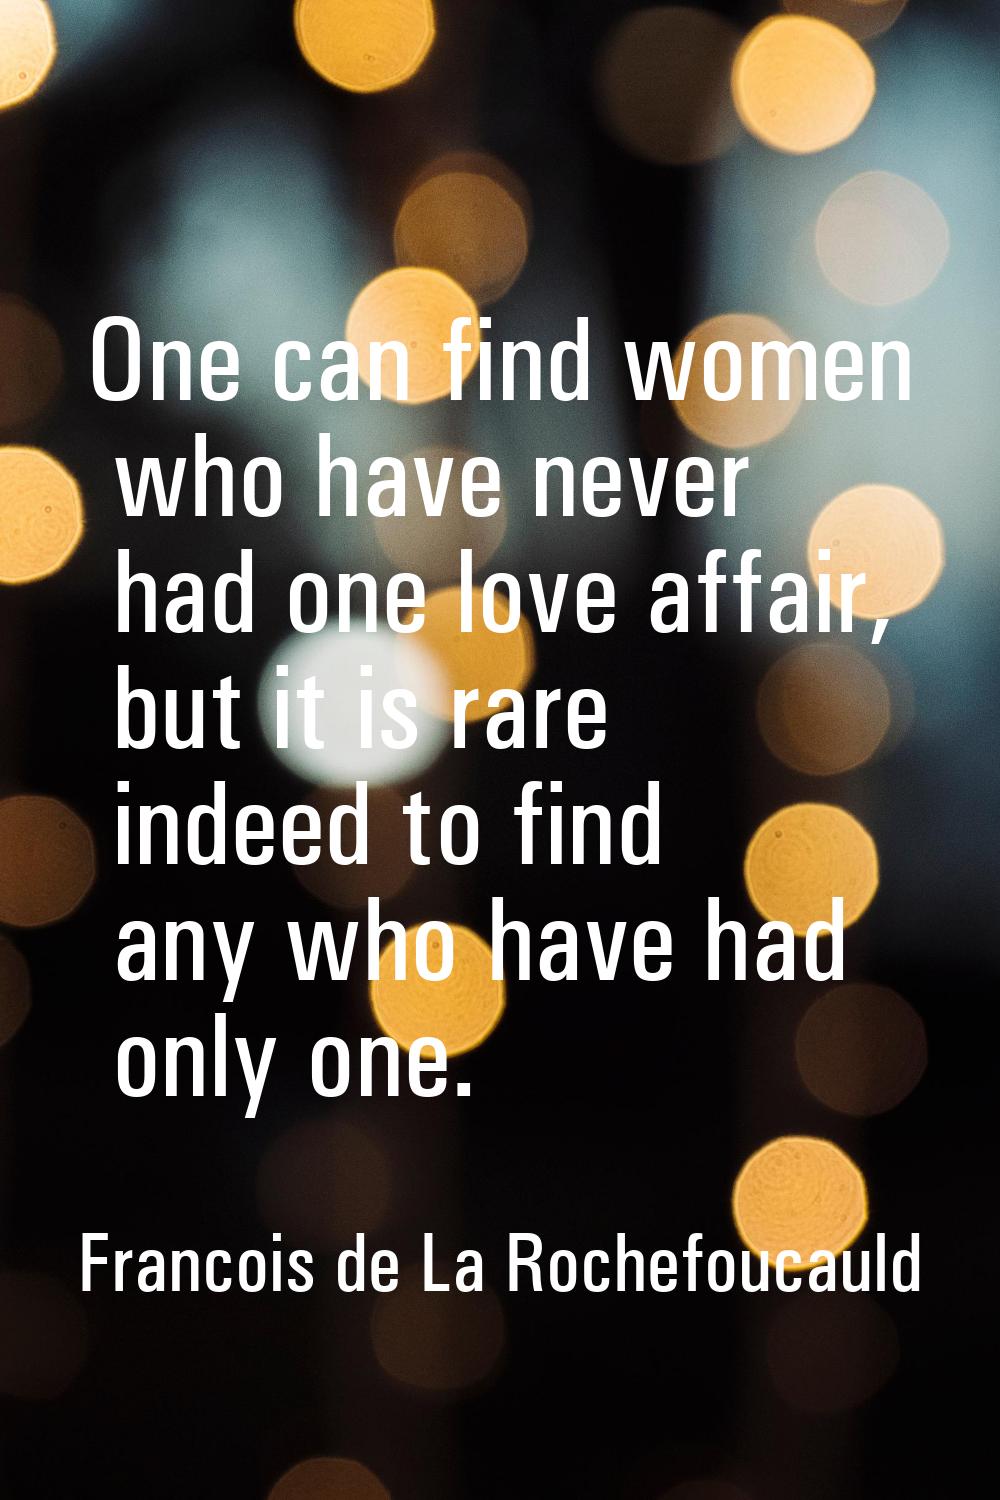 One can find women who have never had one love affair, but it is rare indeed to find any who have h